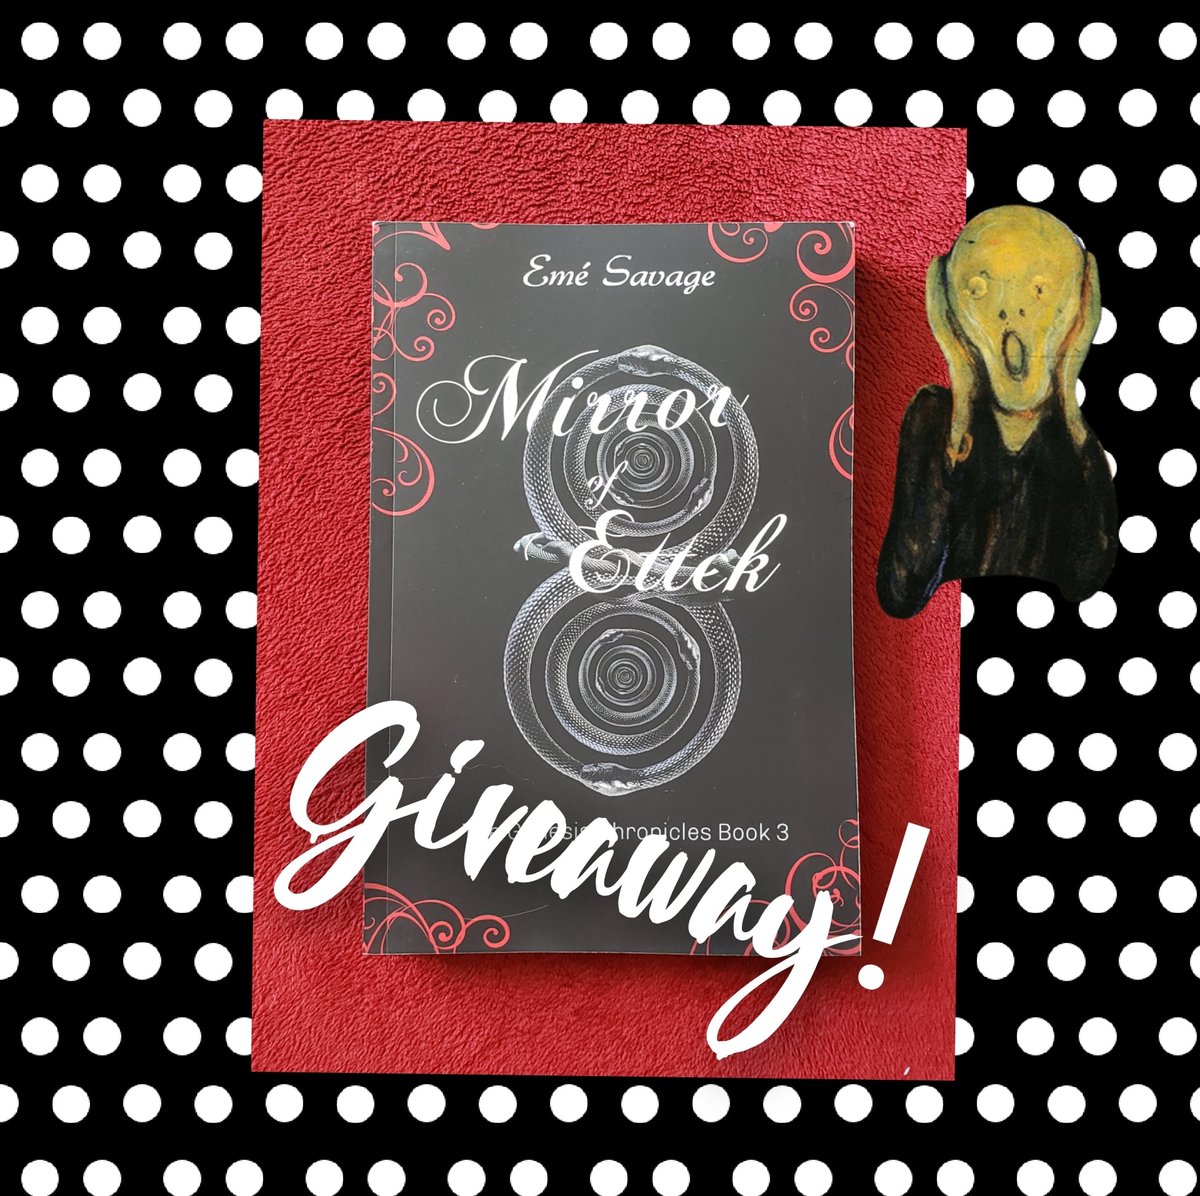 ⭐️⭐️⭐️Giveaway⭐️⭐️⭐️ I'm giving away a copy of my latest novel Mirror of Ettek. All you have to do is: ⭐️Sign up for my newsletter. eepurl.com/hnkhZr ⭐️Retweet this post ⭐️Tag three friends The winner will be drawn on Sunday, February 27th.